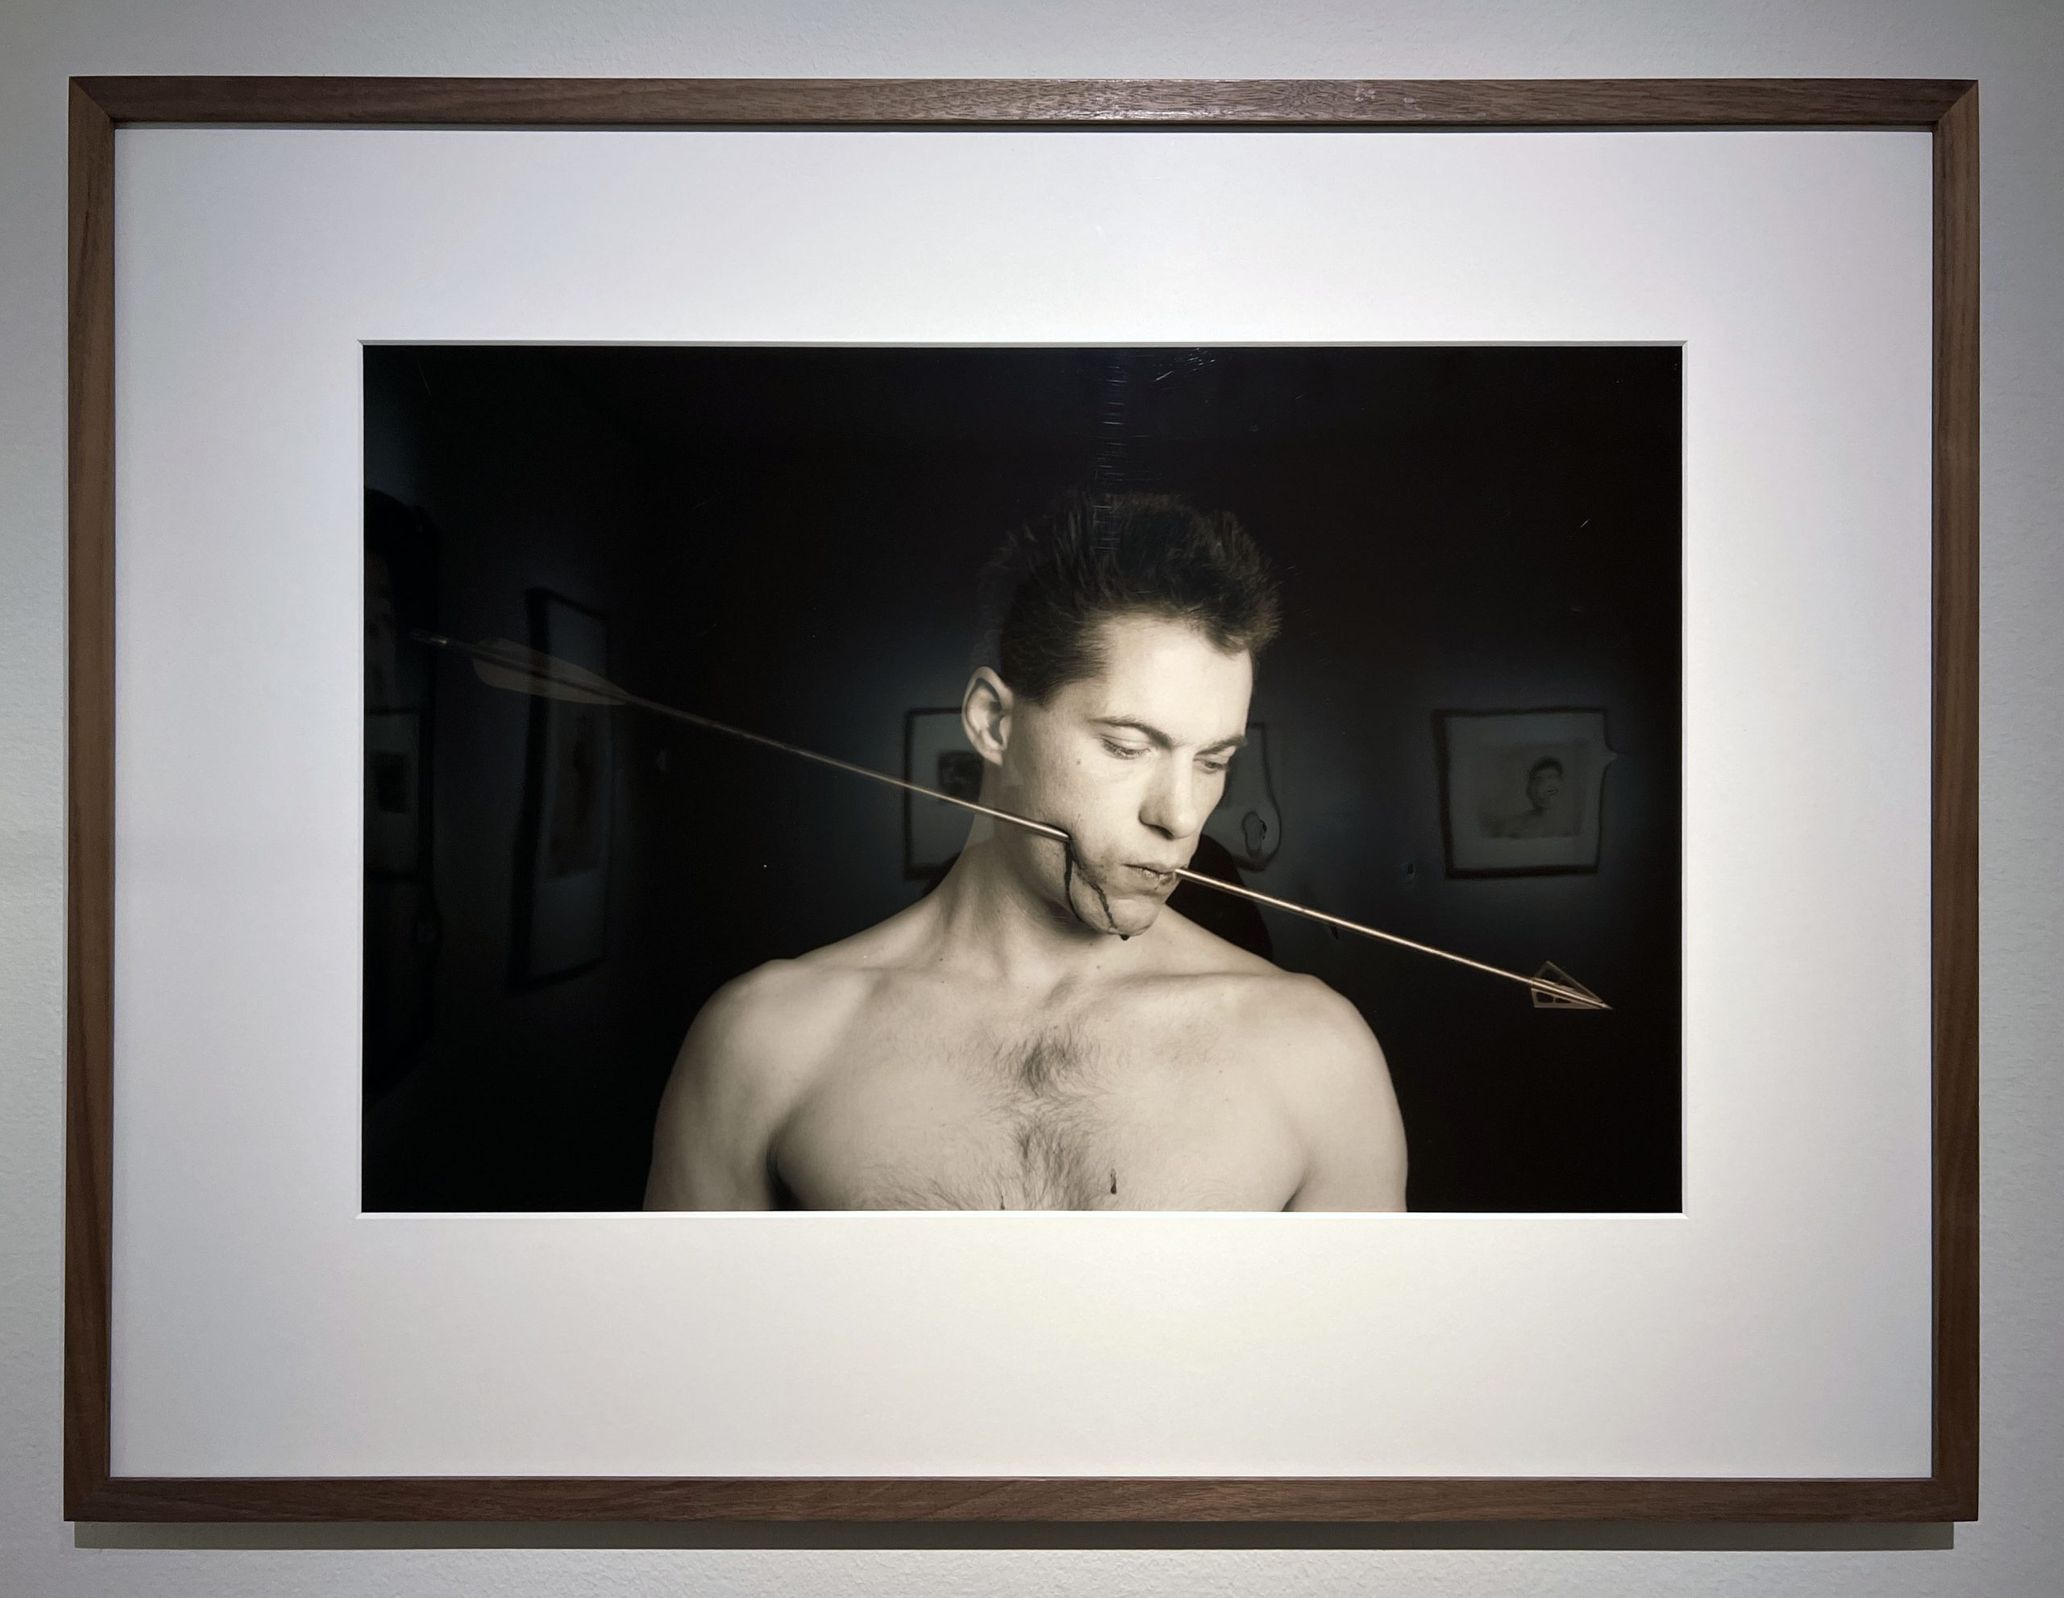 Paul Blanca, ‘Self-portrait with an arrow, 1987’, a self-portrait of himself with an arrow through his cheek. Blanca became known in the 1980s for a photo series of himself as a subject.